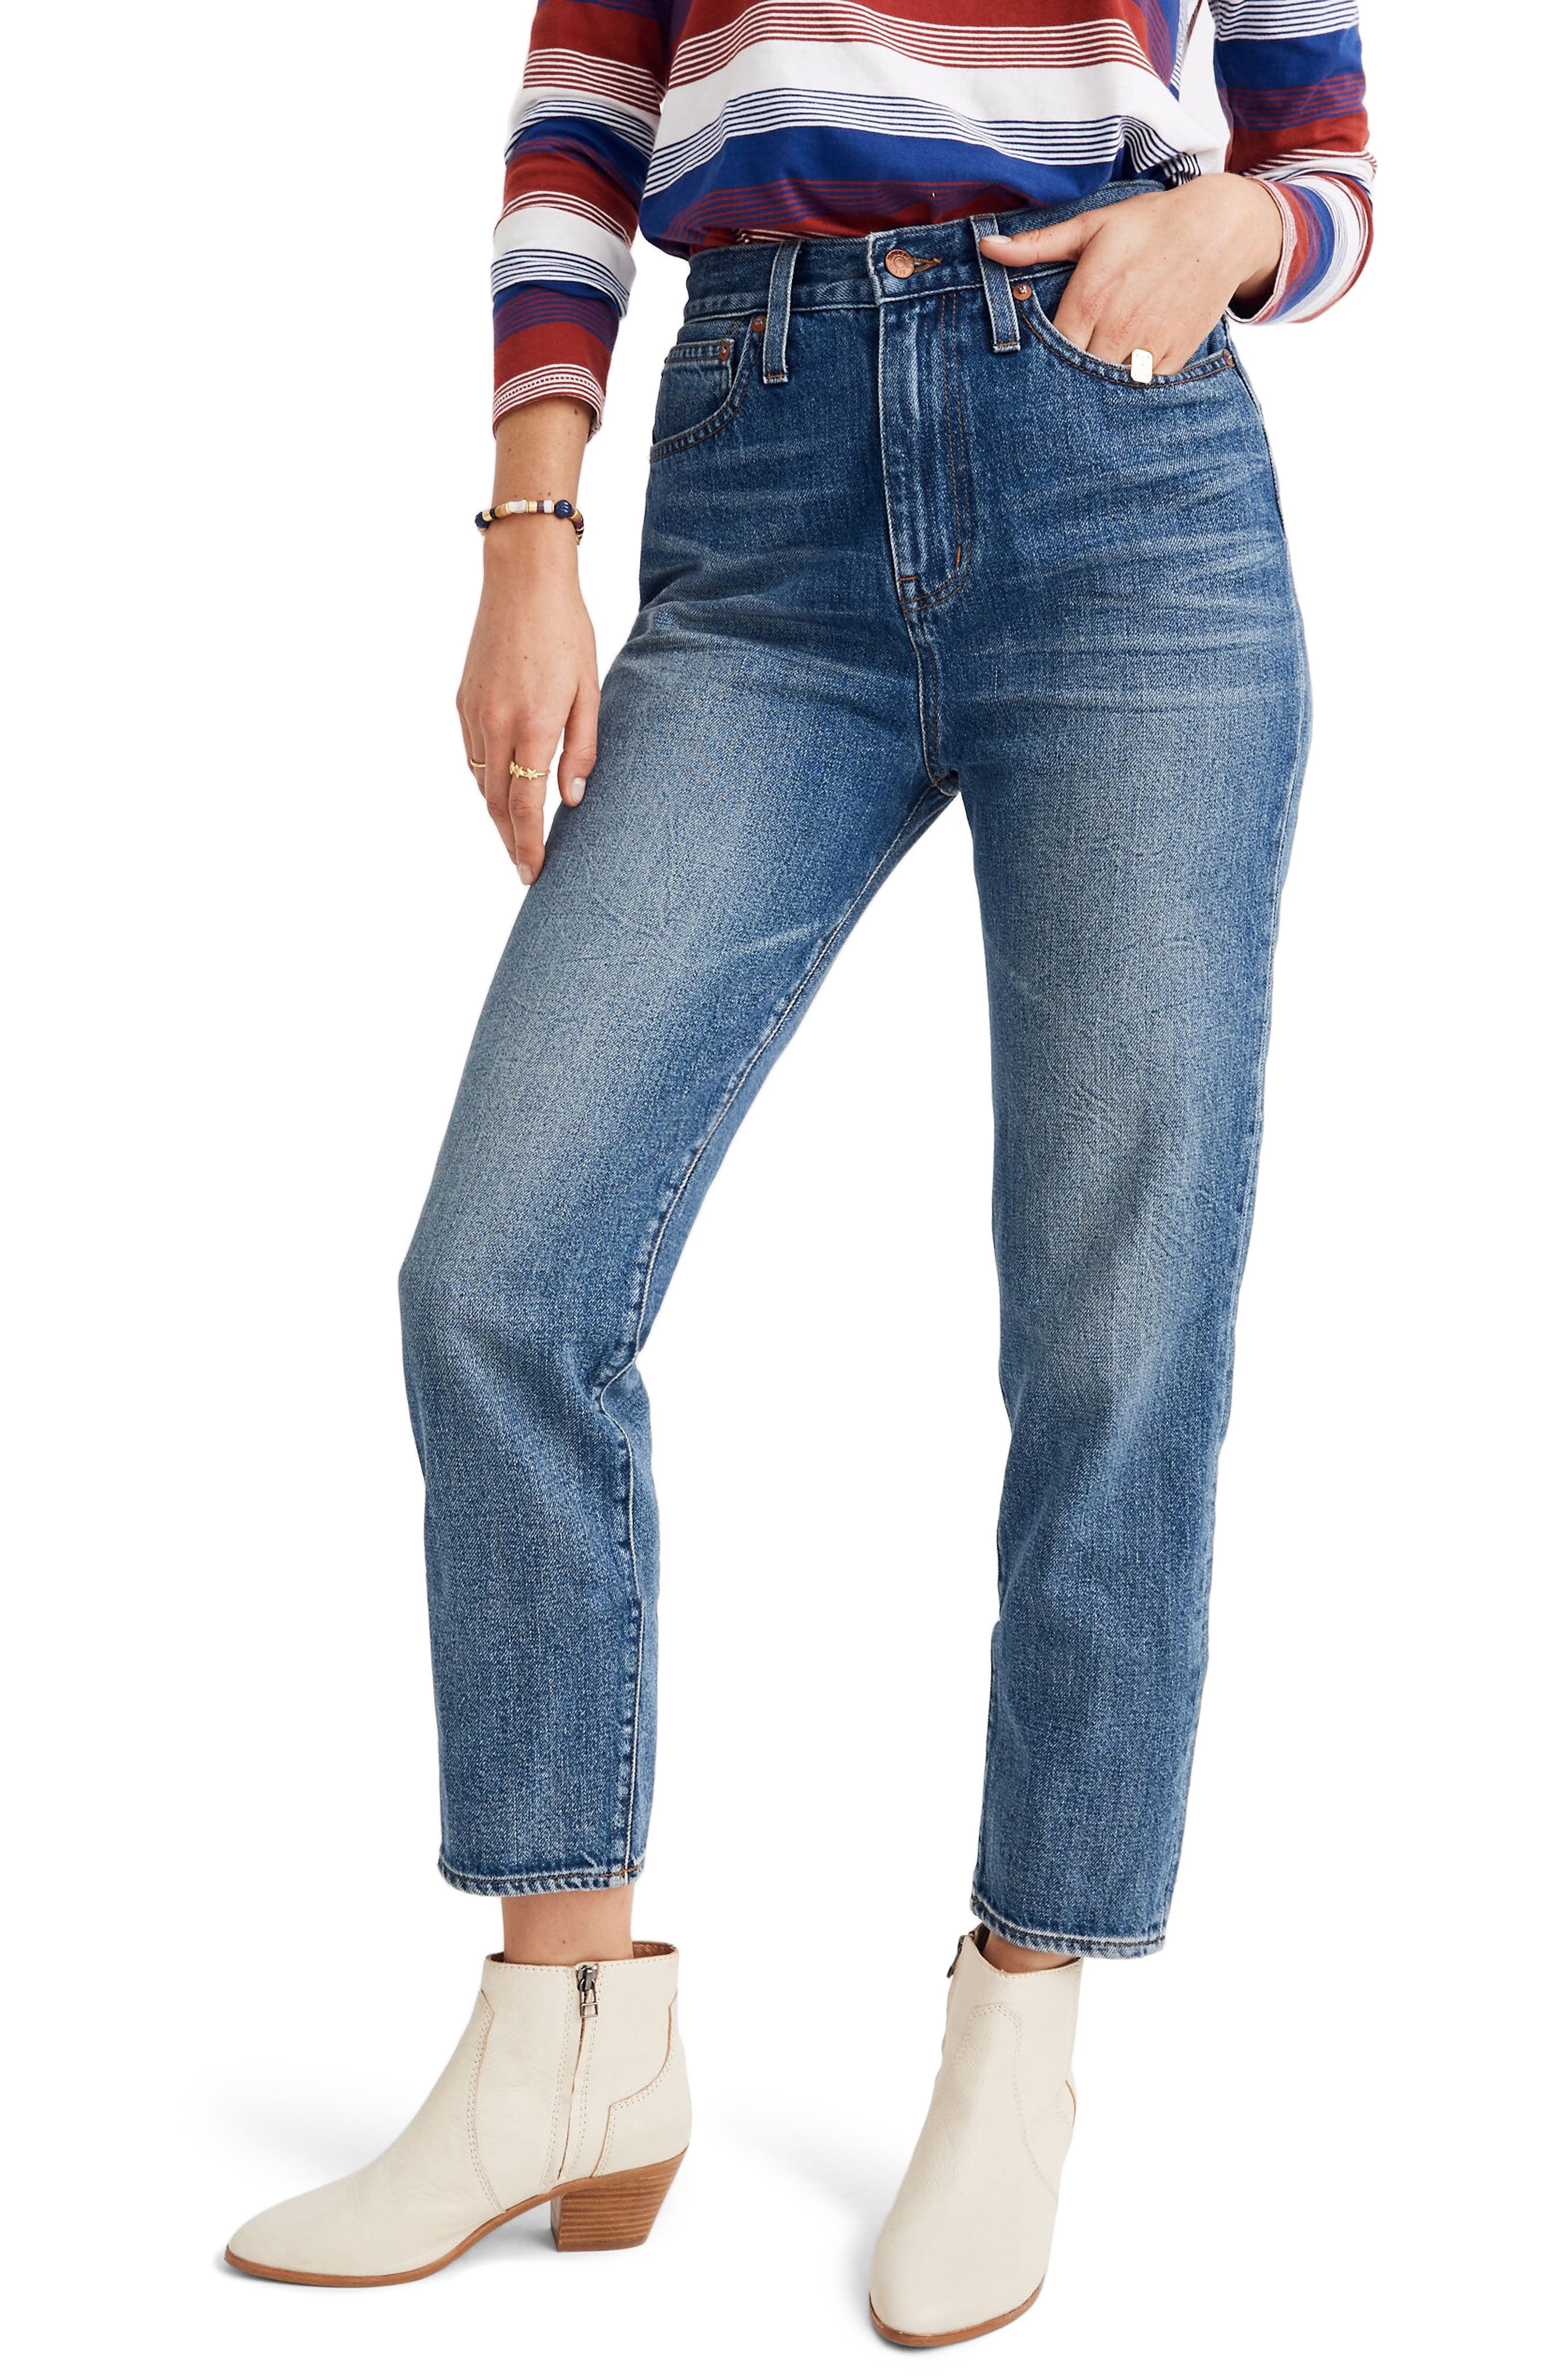 madewell bring in jeans